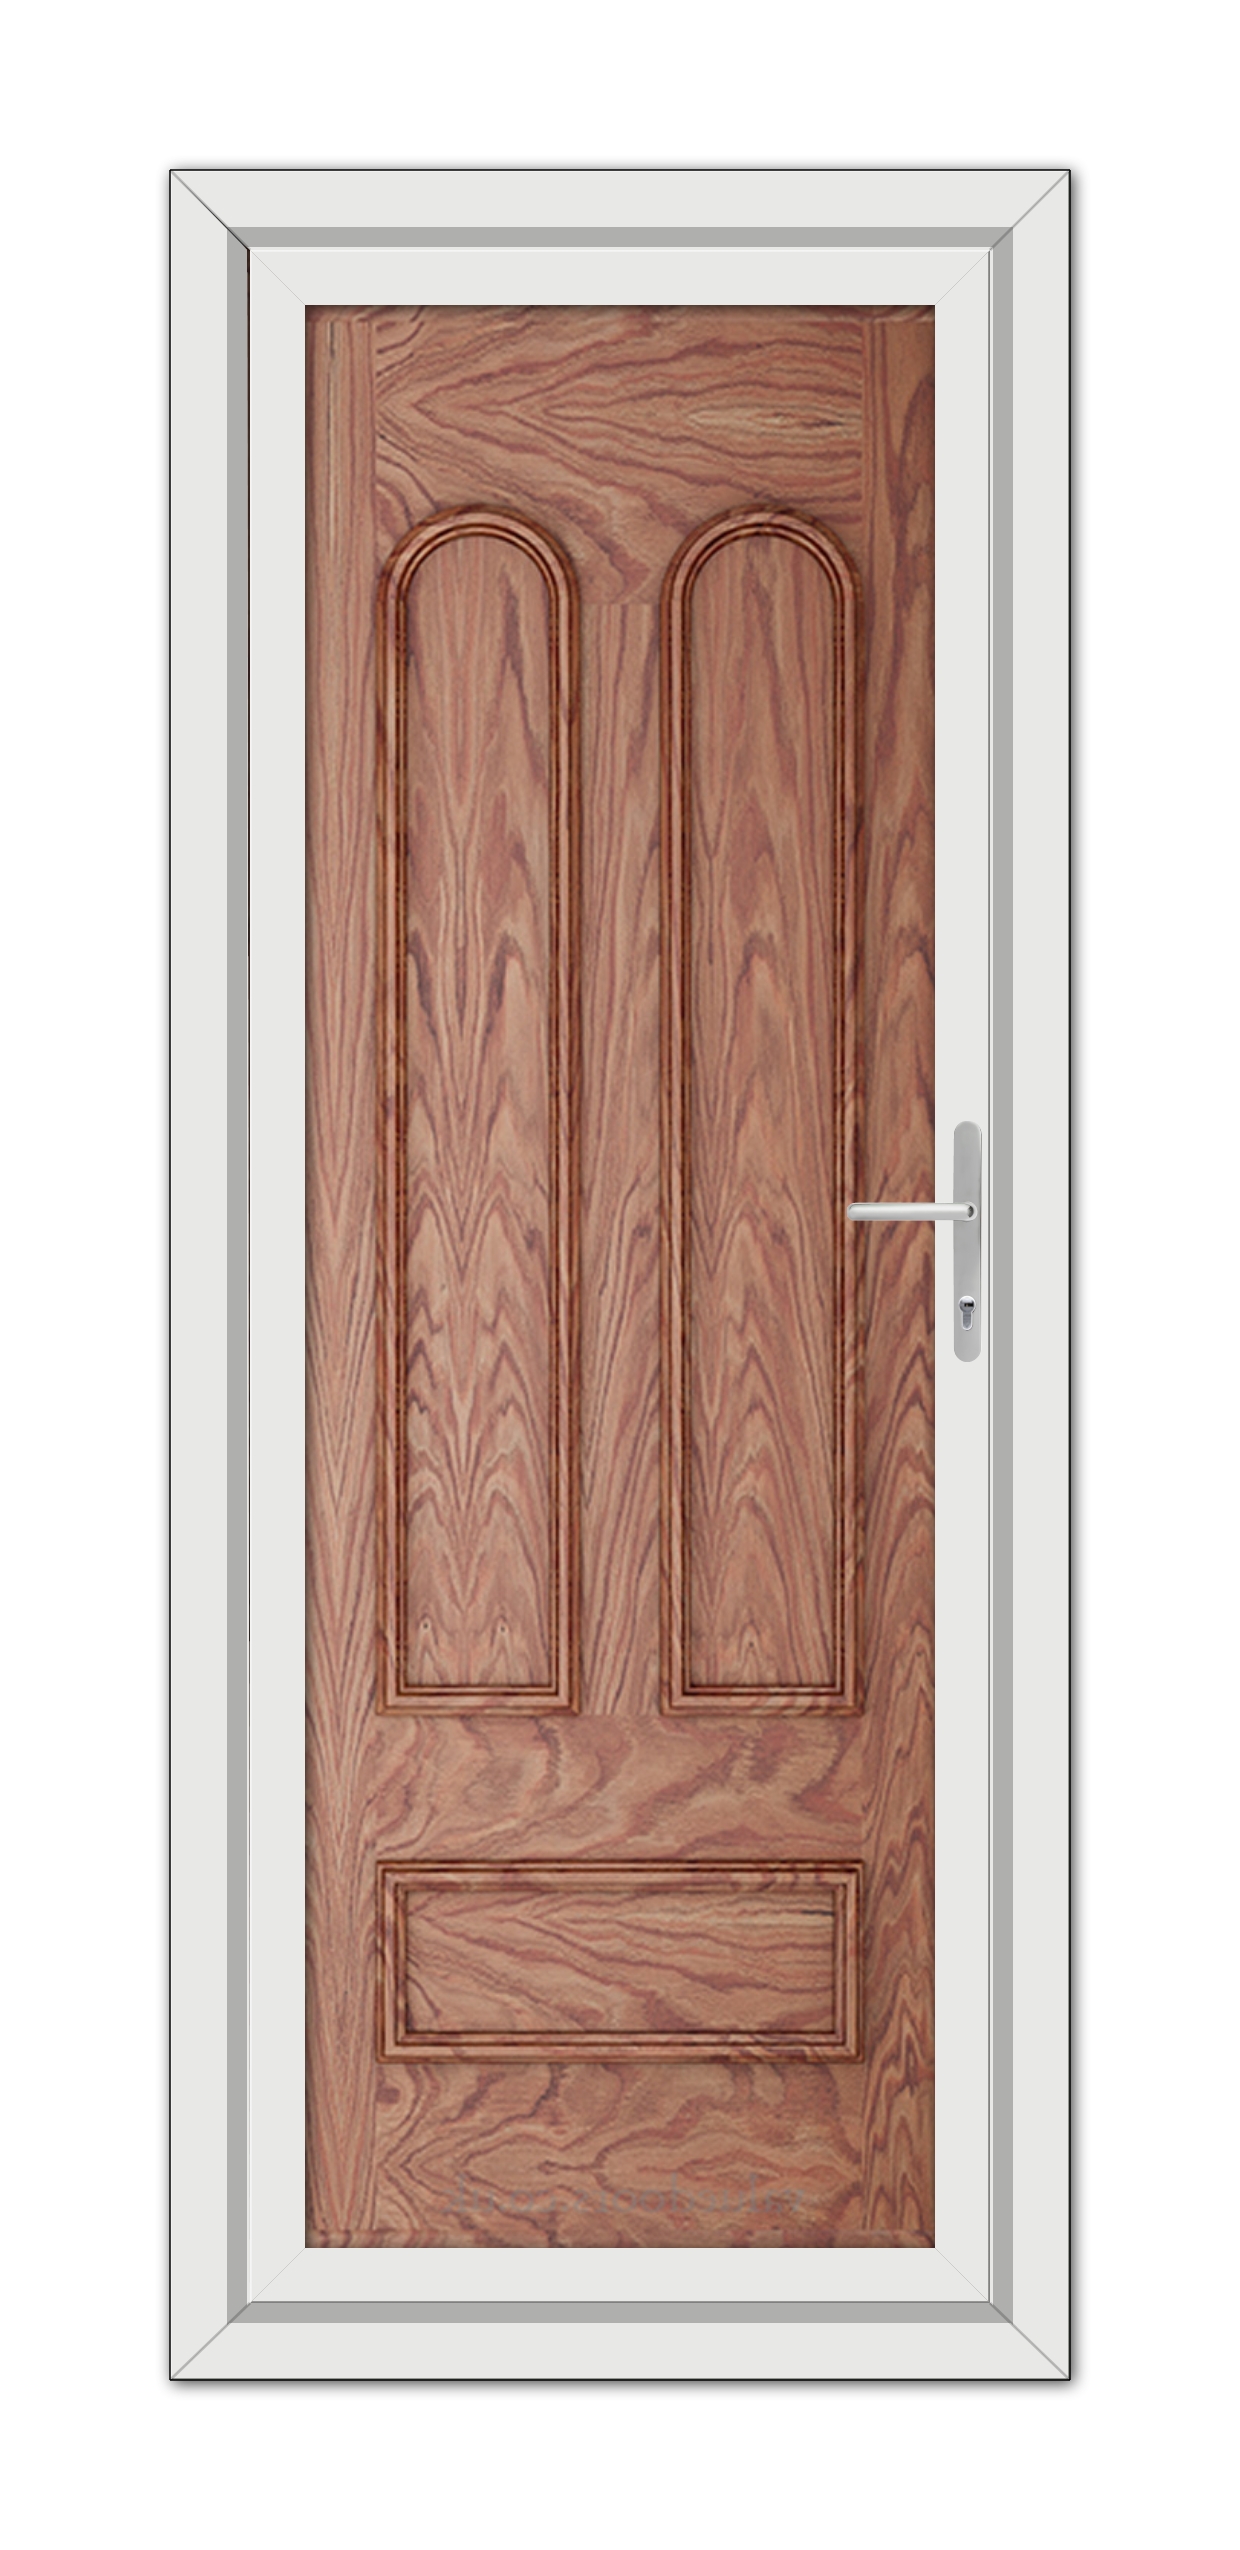 A closed Solid Oak Madrid Solid uPVC Door with panel designs, framed by a white door frame, featuring a metal handle on the right side.